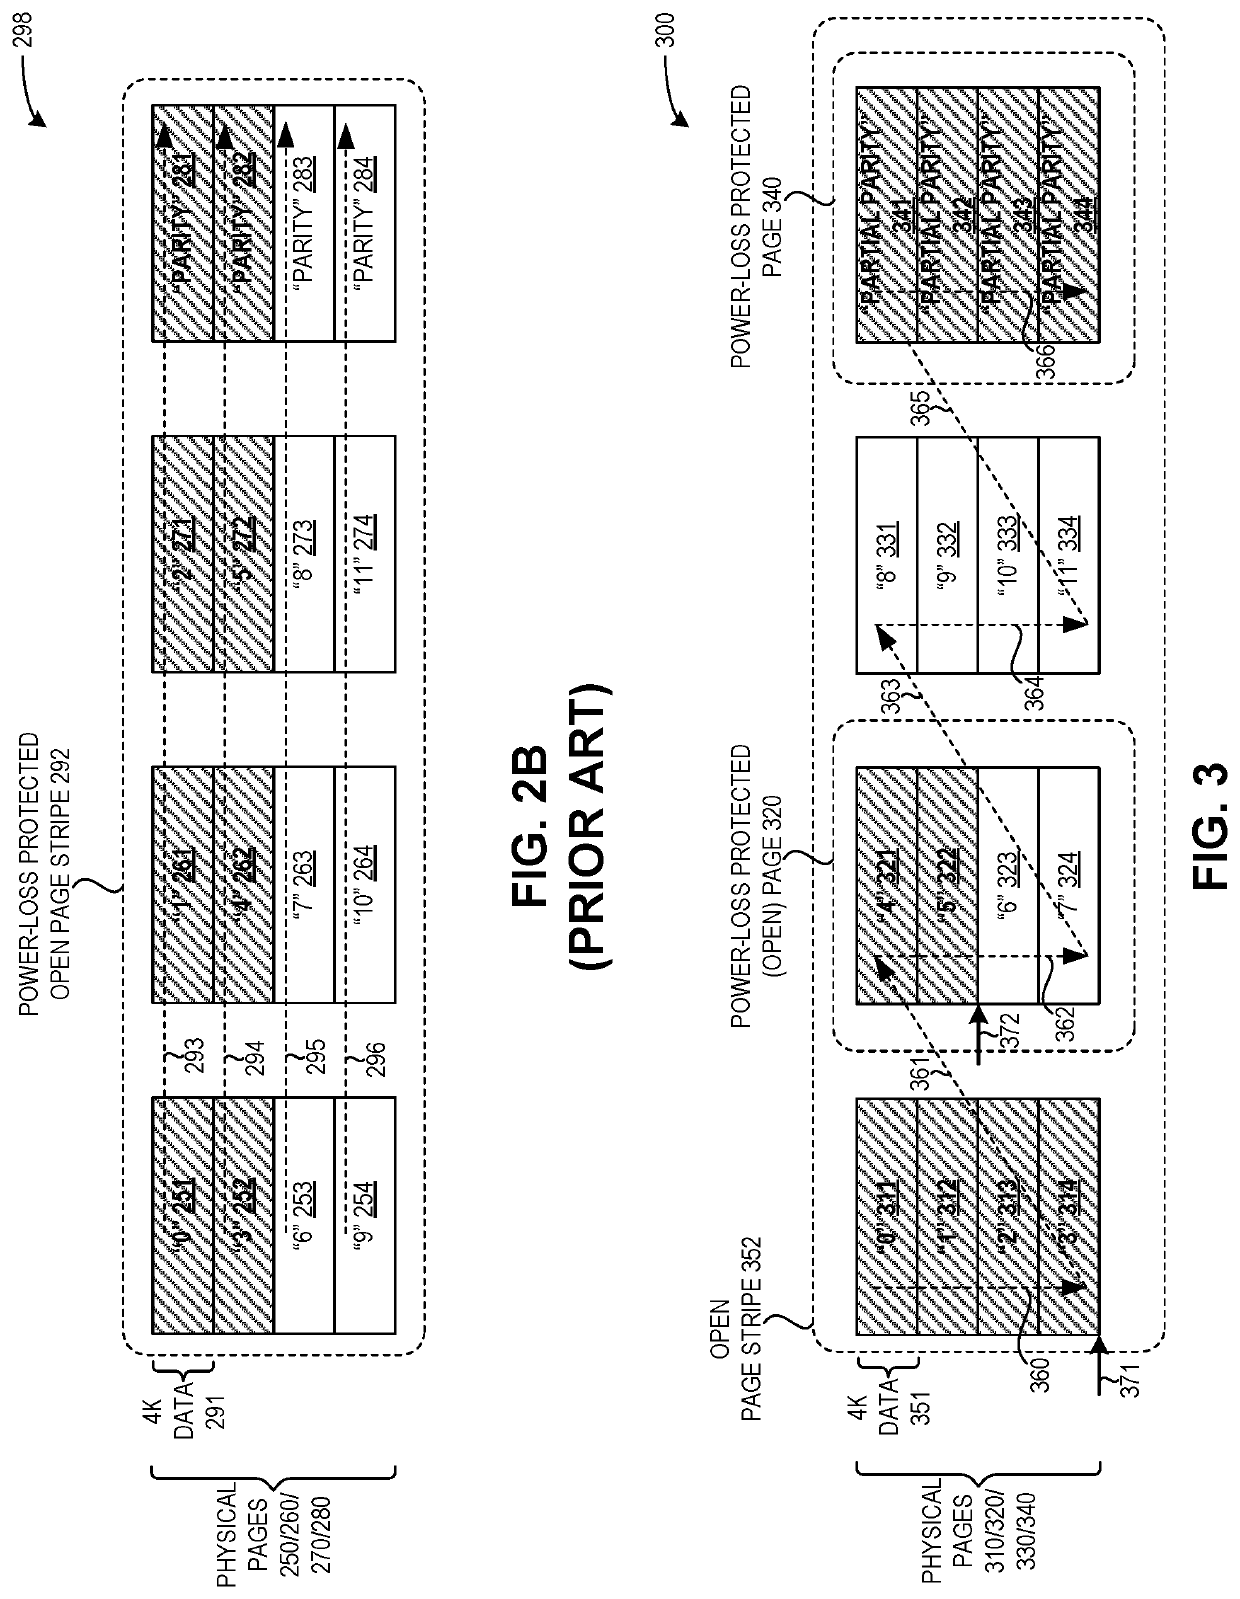 System and method for flash storage management using multiple open page stripes